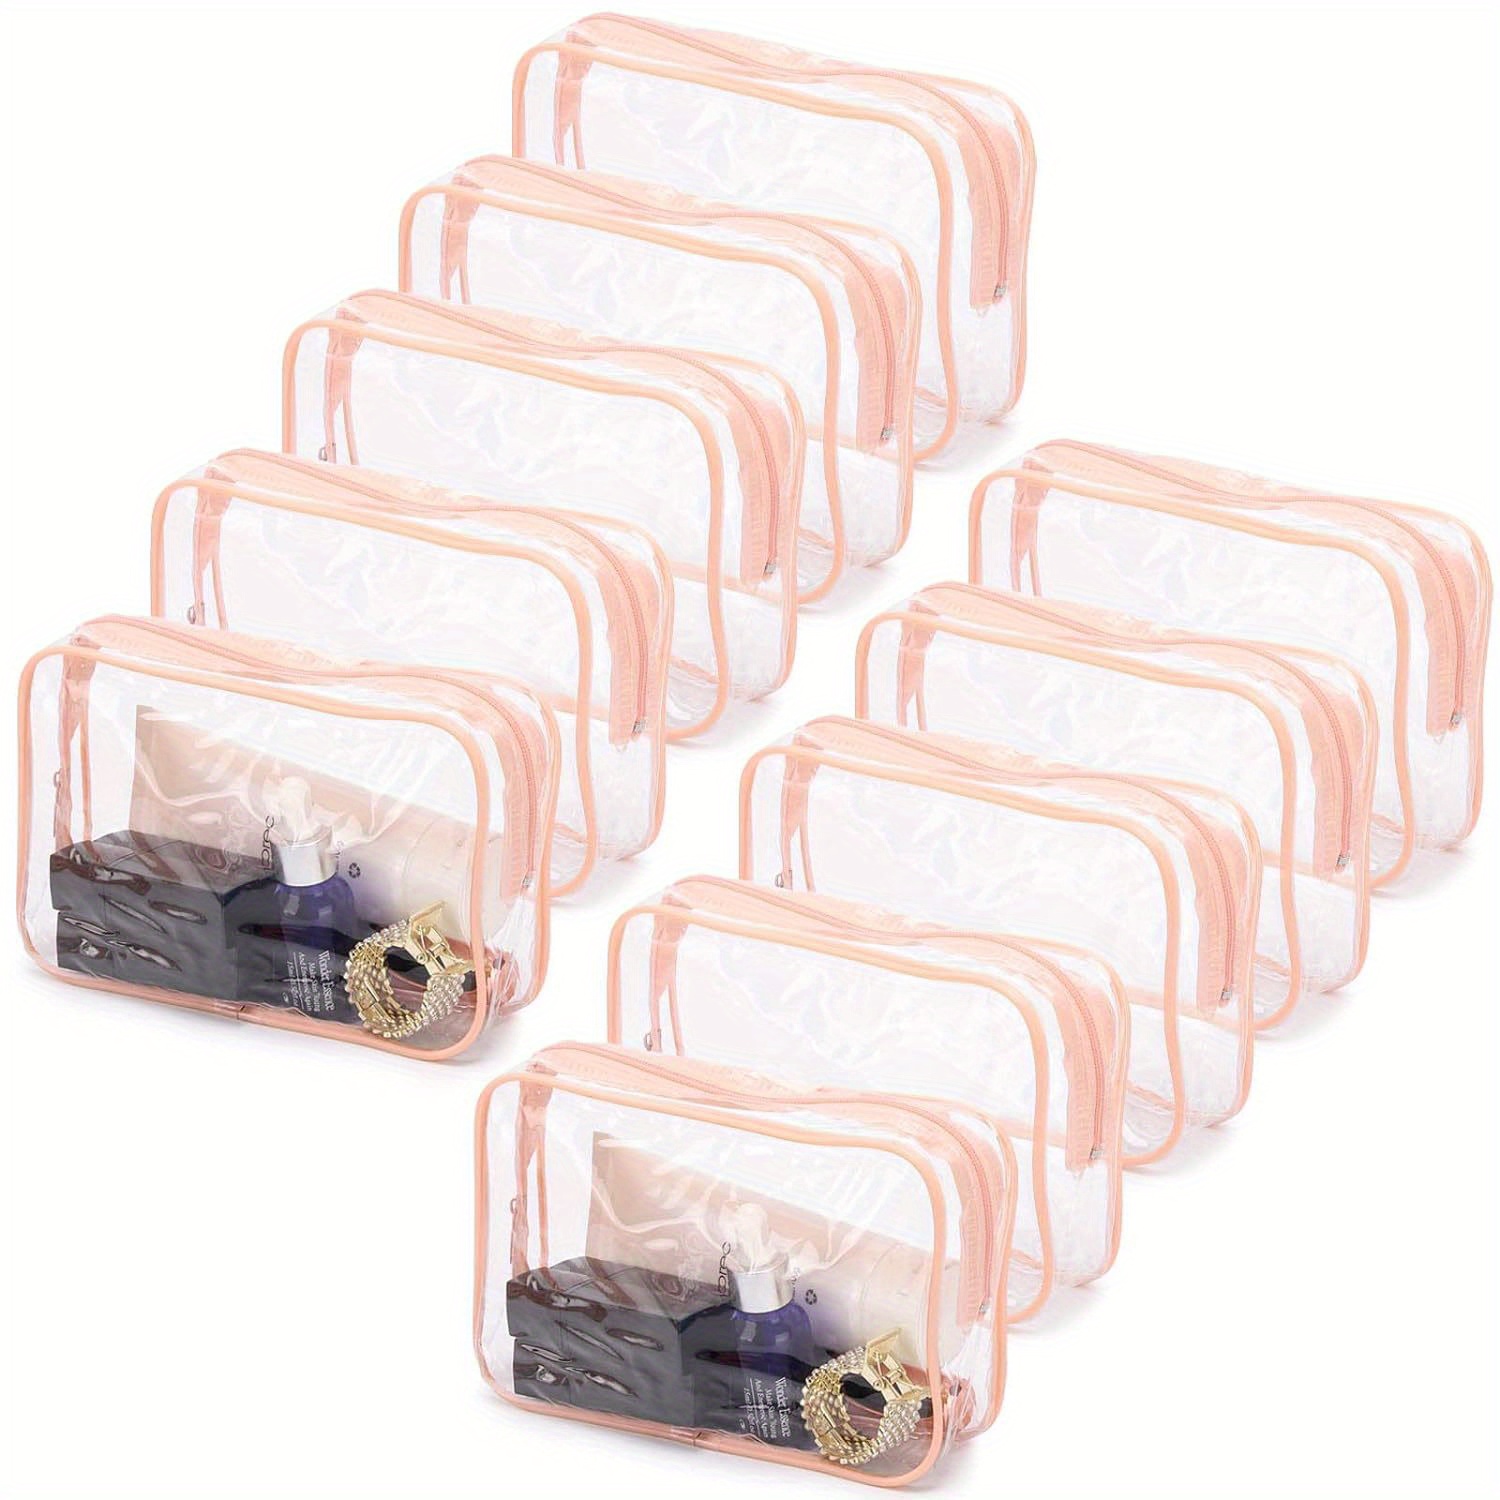 

10 Pcs Clear Cosmetic Bags Small Makeup Bags Portable Waterproof Travel Toiletry Bags Organizer Peach, 7.5"x 4.8"x 2.3"